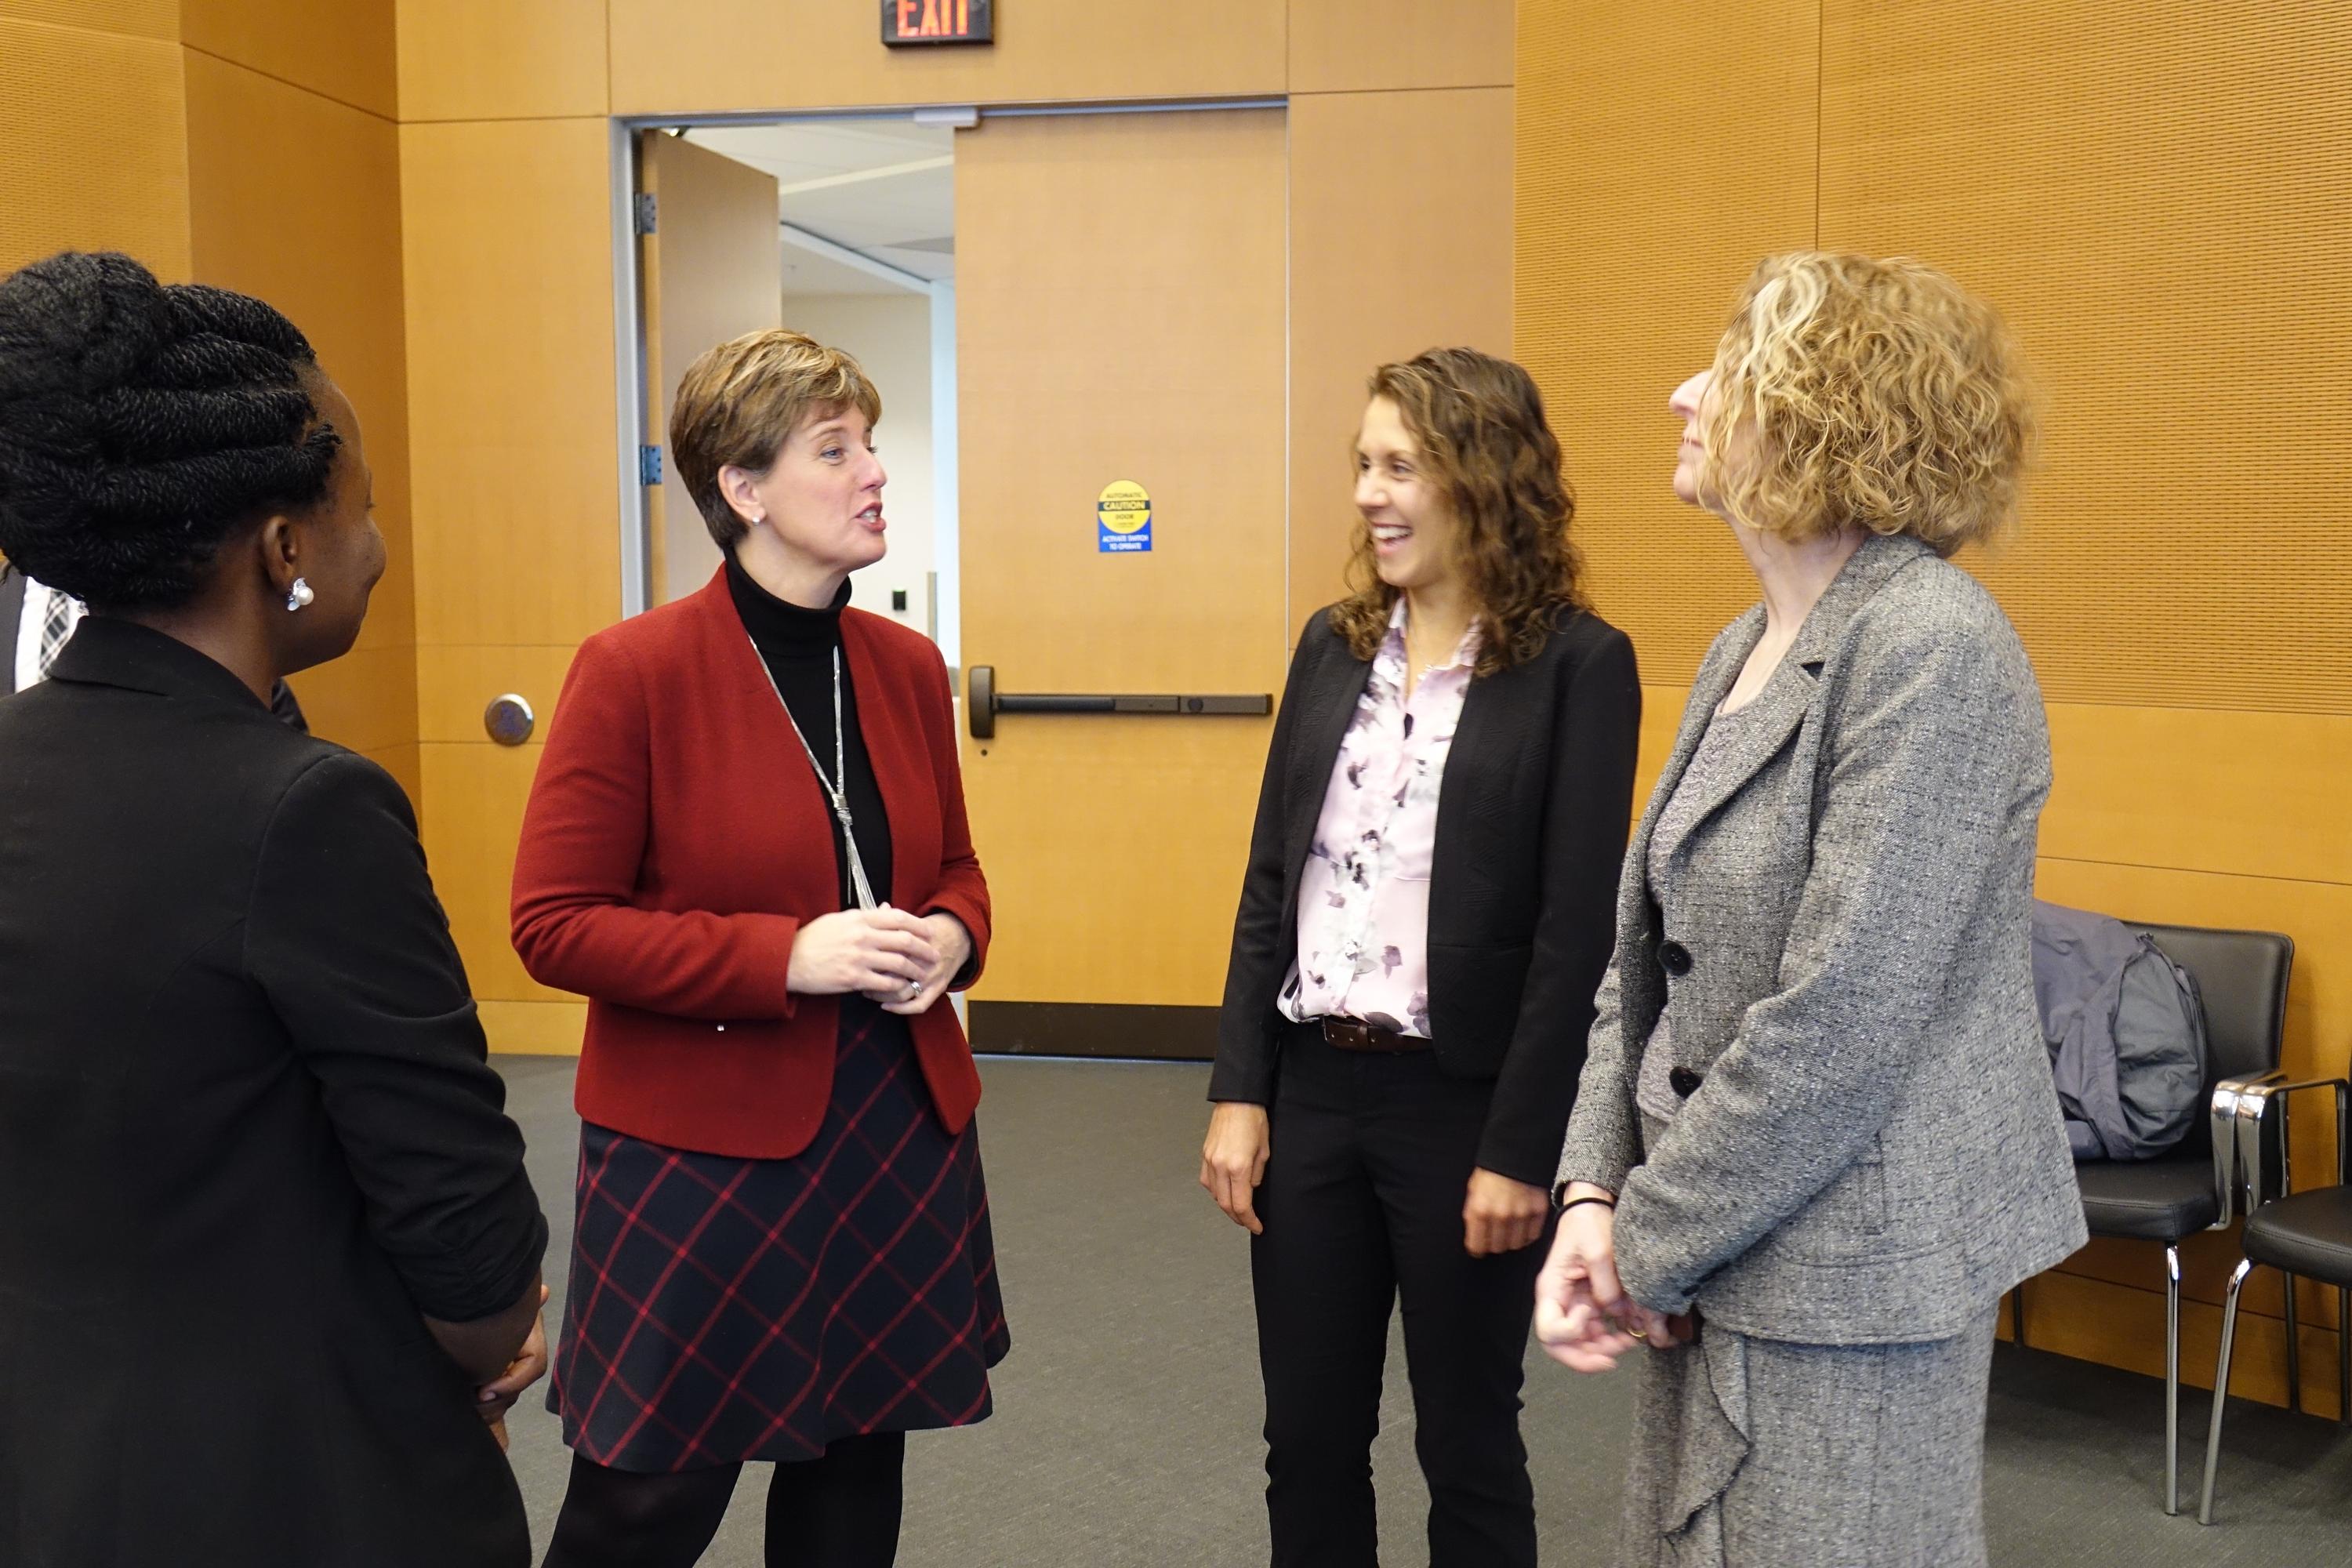 Elizabeth, Dr. Elliott, and Andrea Rishworth interact with the Minister of International Development